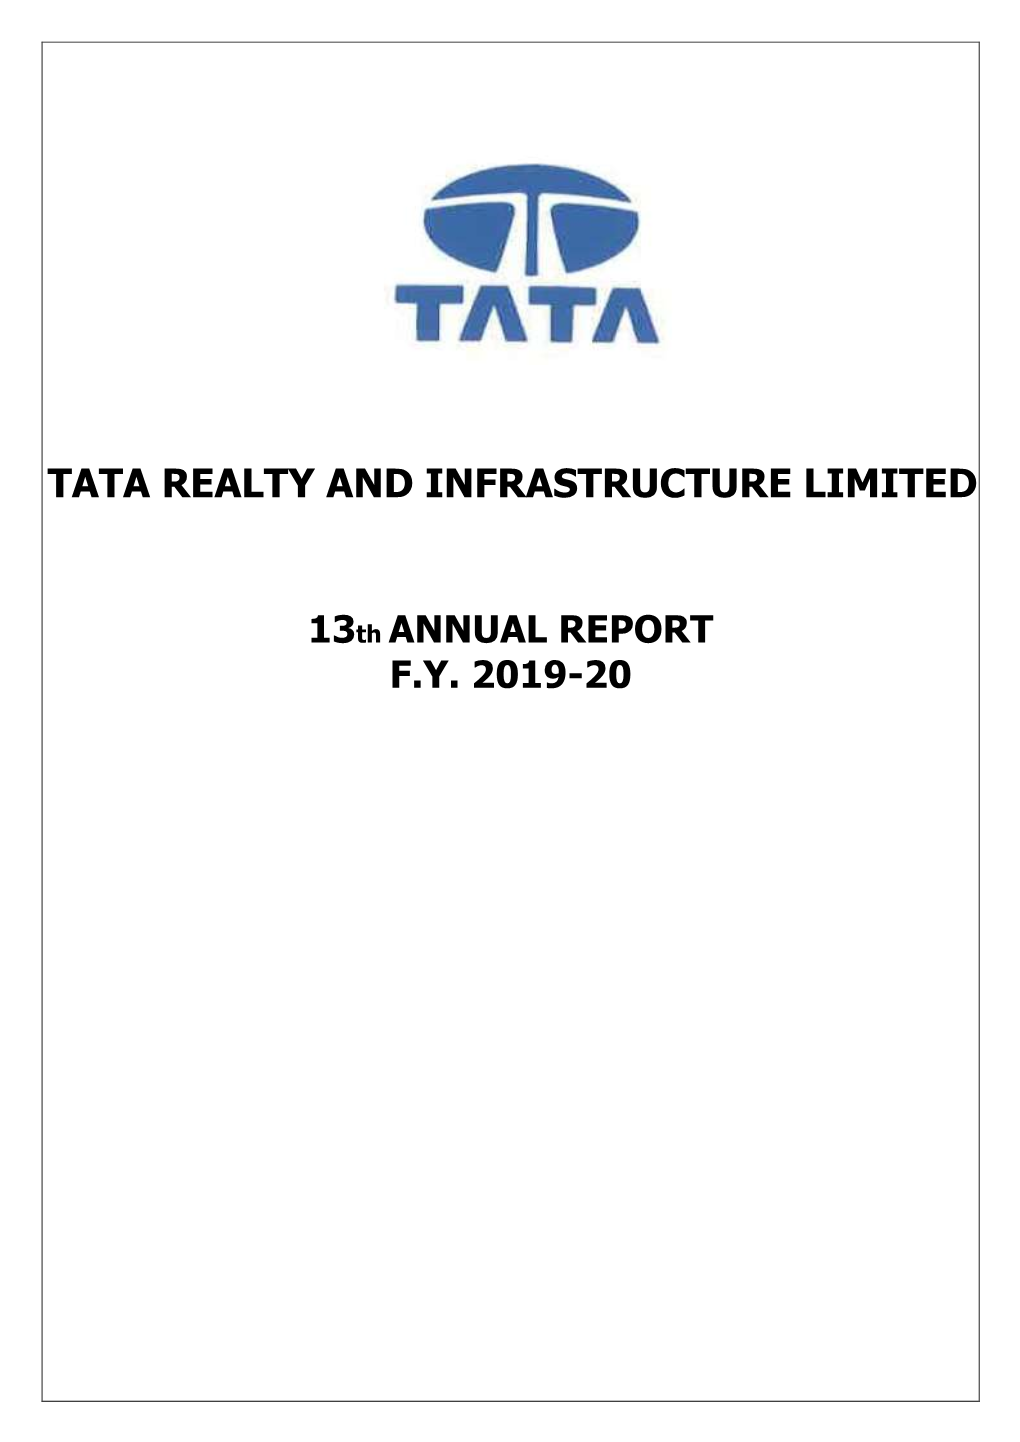 Tata Realty and Infrastructure Limited